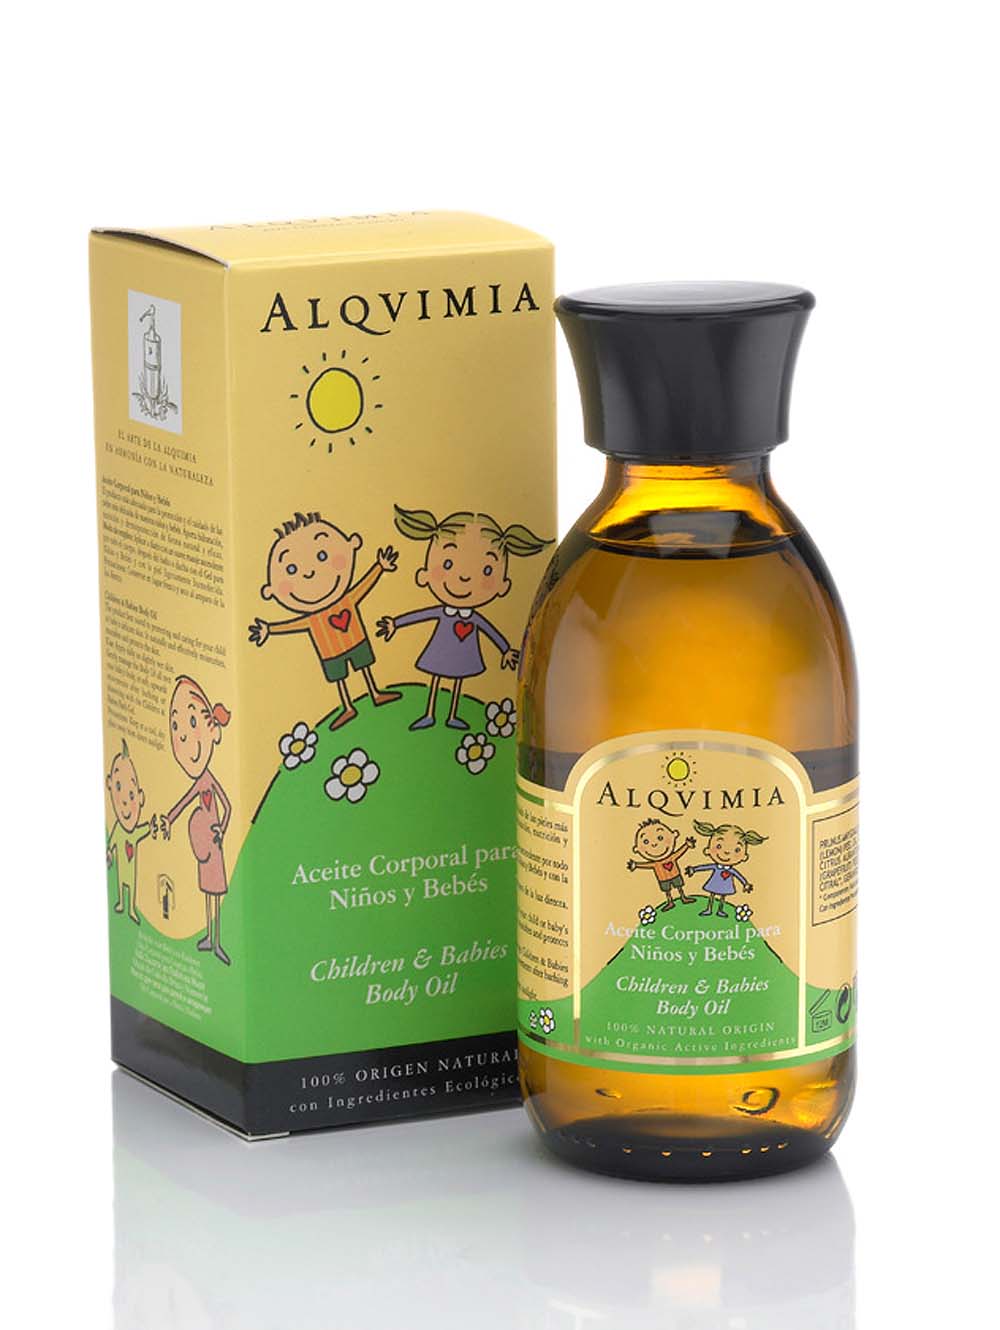 Alqvimia Childrens and Babies Body Oil